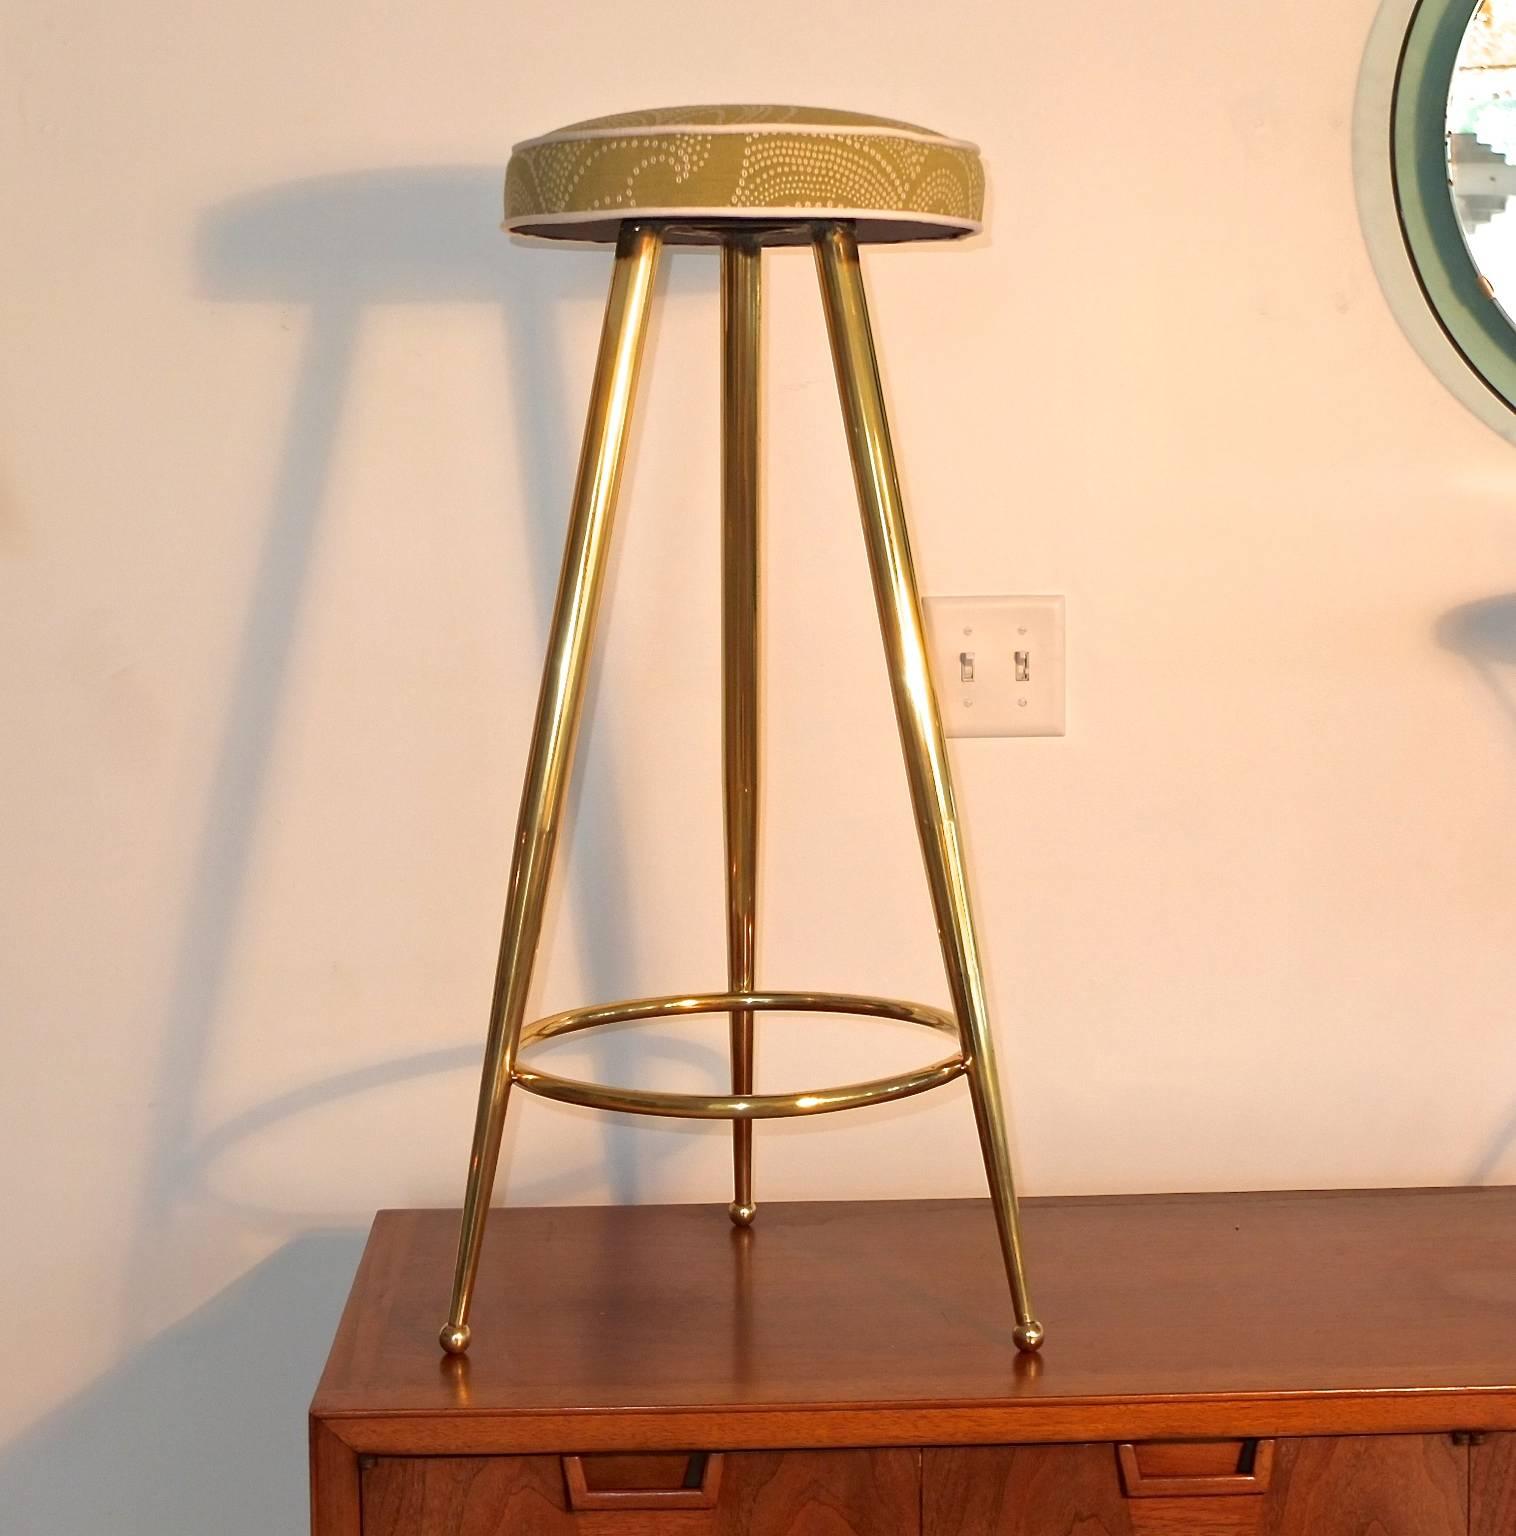 Classic original 1950s Italian Mid-Century Modern bar stools constructed of three solid brass tapered legs on brass ball feet, braced by a solid brass ring footrest and at the top a triangular steel bracket attached to which is the round box-edge